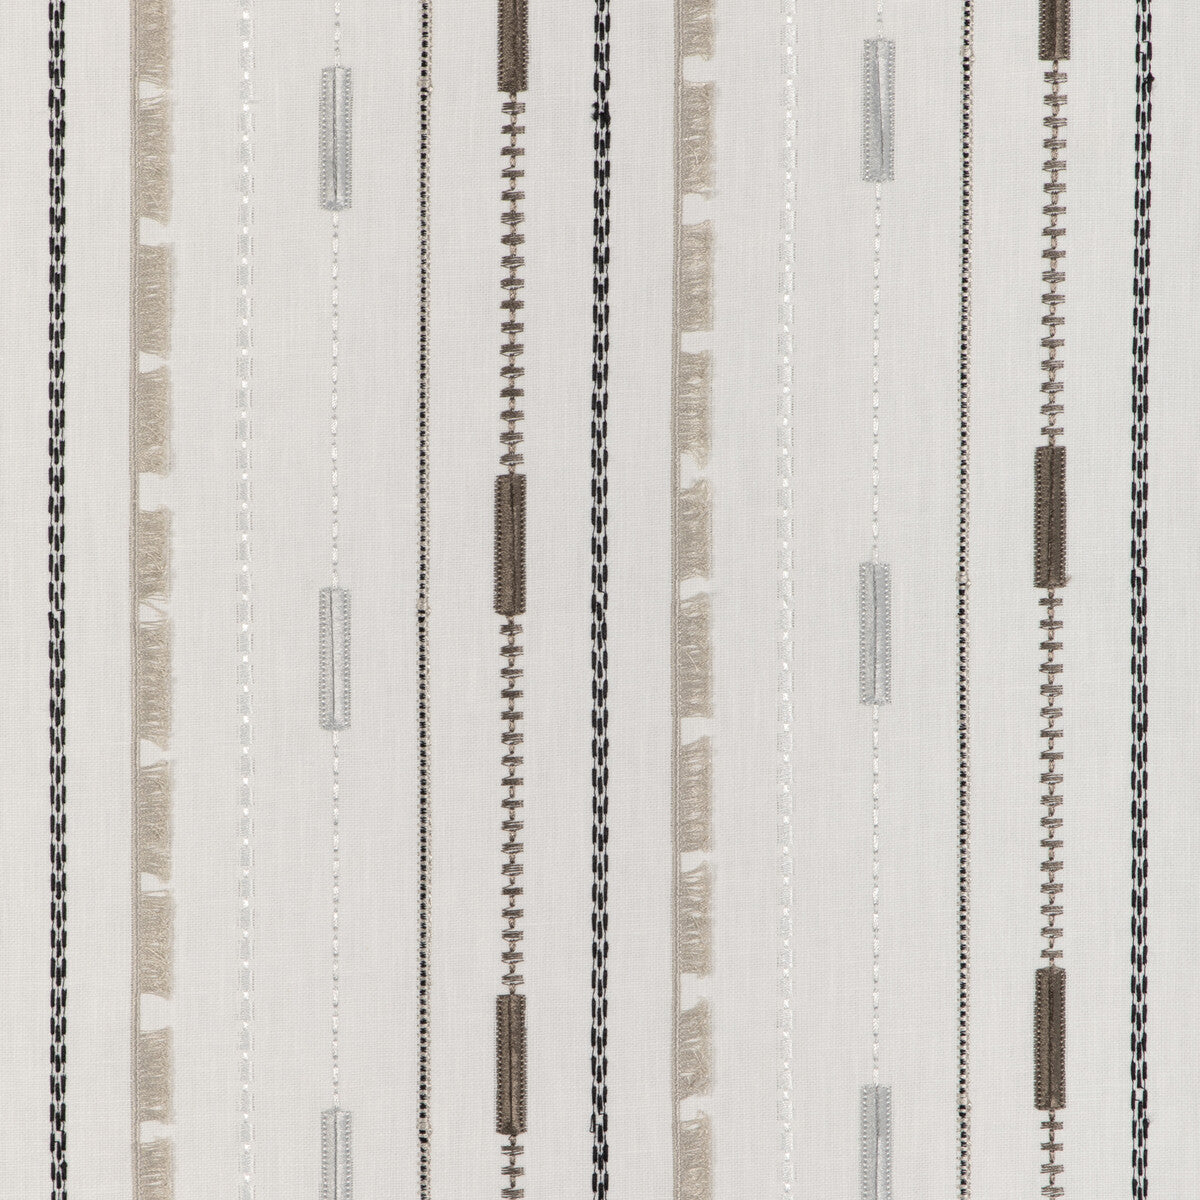 Kravet Basics fabric in 37163-106 color - pattern 37163.106.0 - by Kravet Basics in the Modern Embroideries III collection